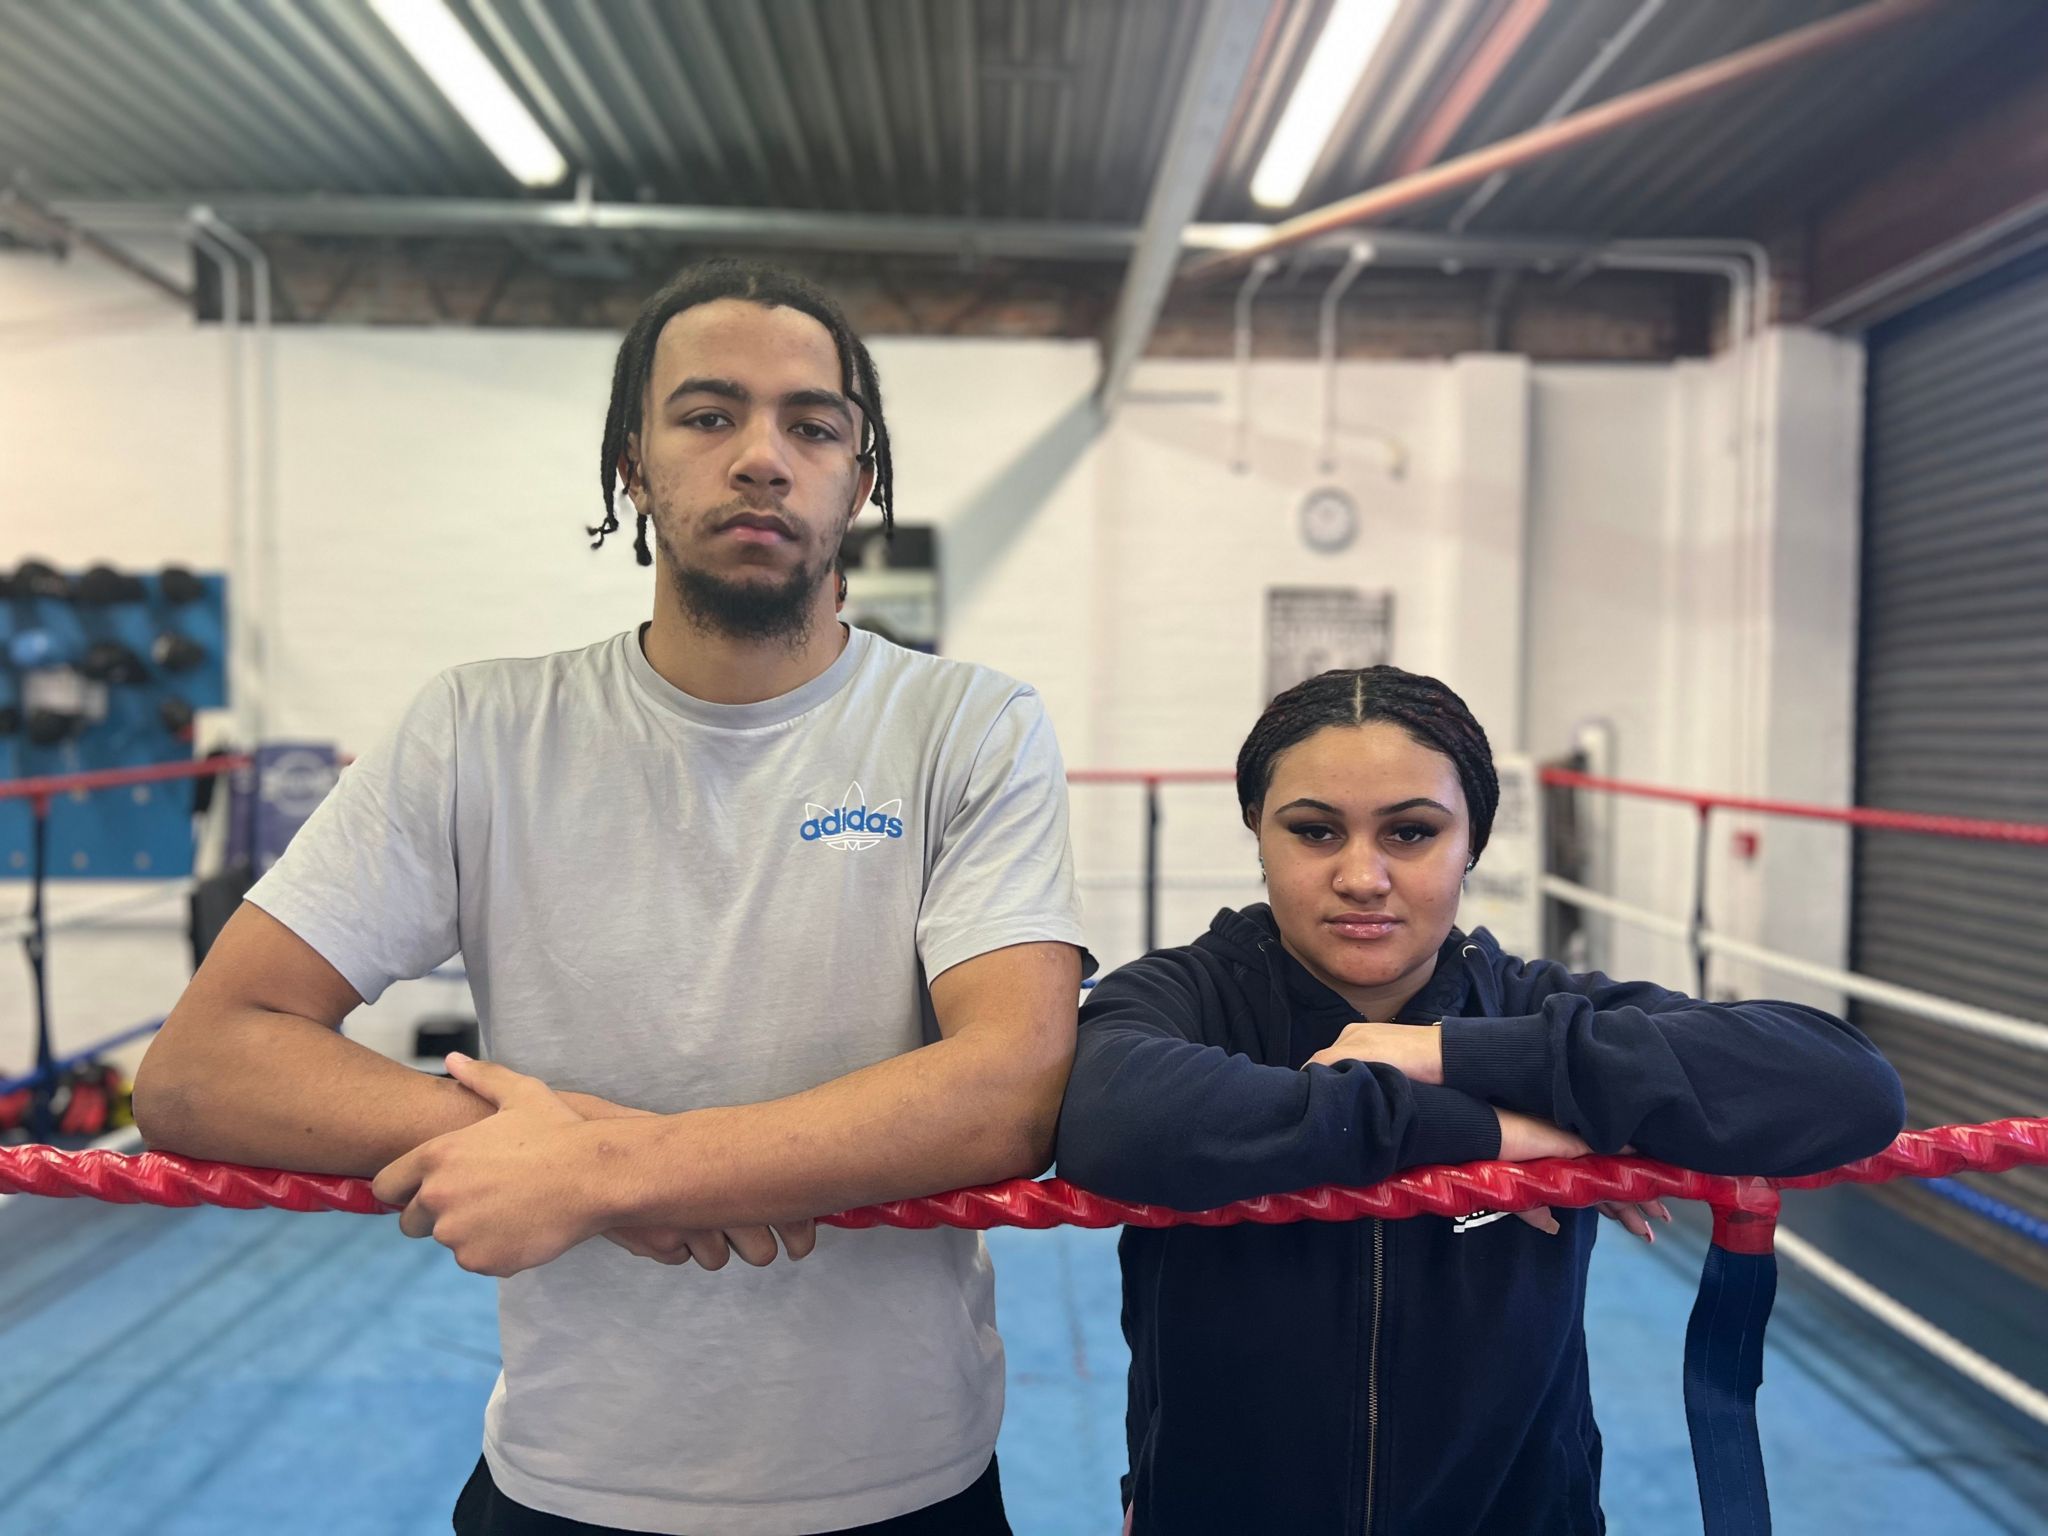 Marcel and Serena are standing next to each other in a boxing ring. 